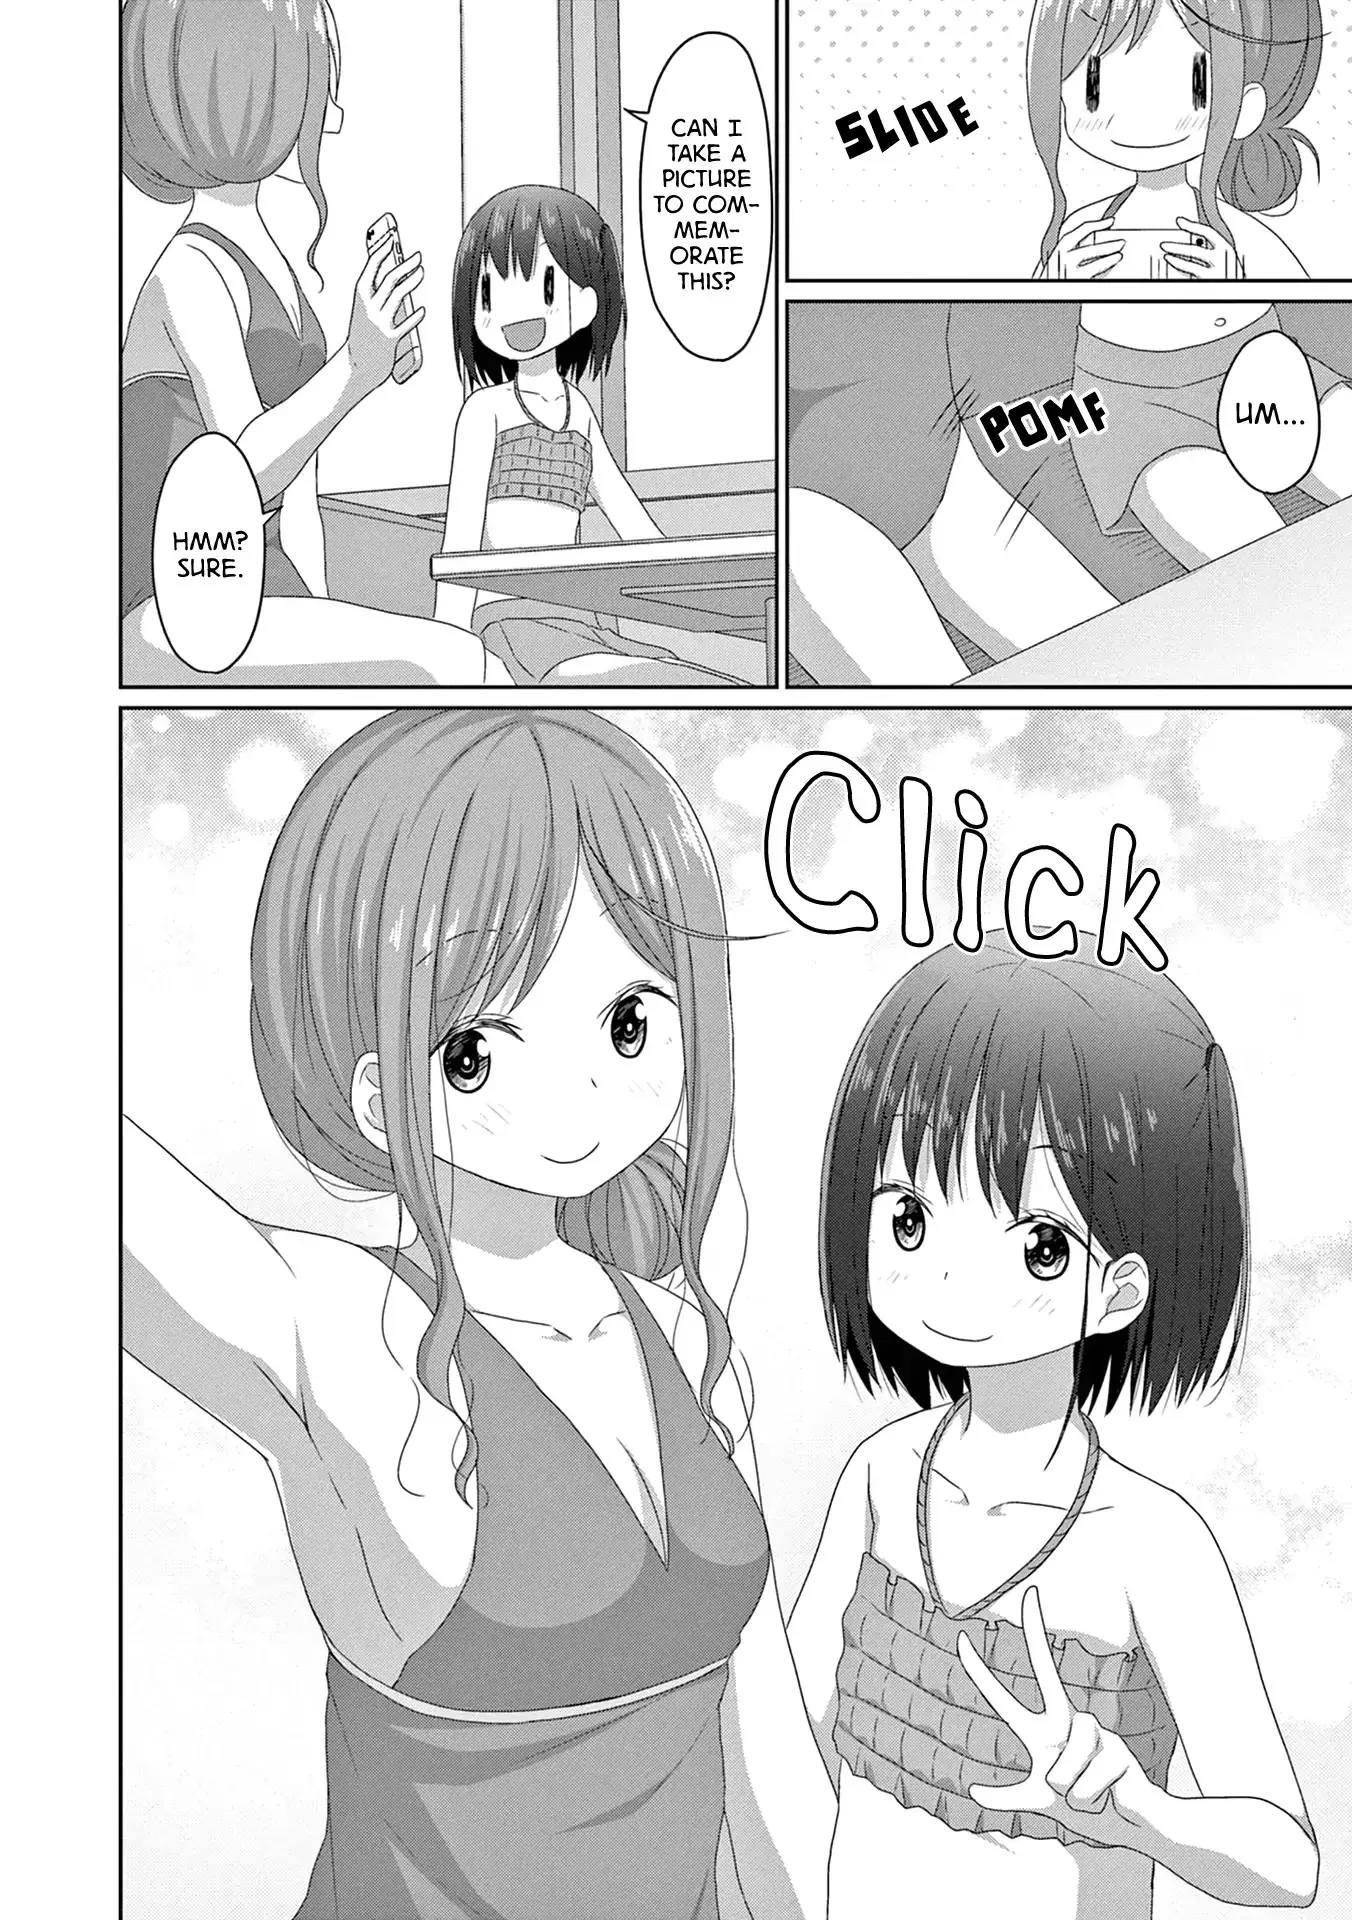 Js-San To Ol-Chan - 13 page 14-8c3258ad